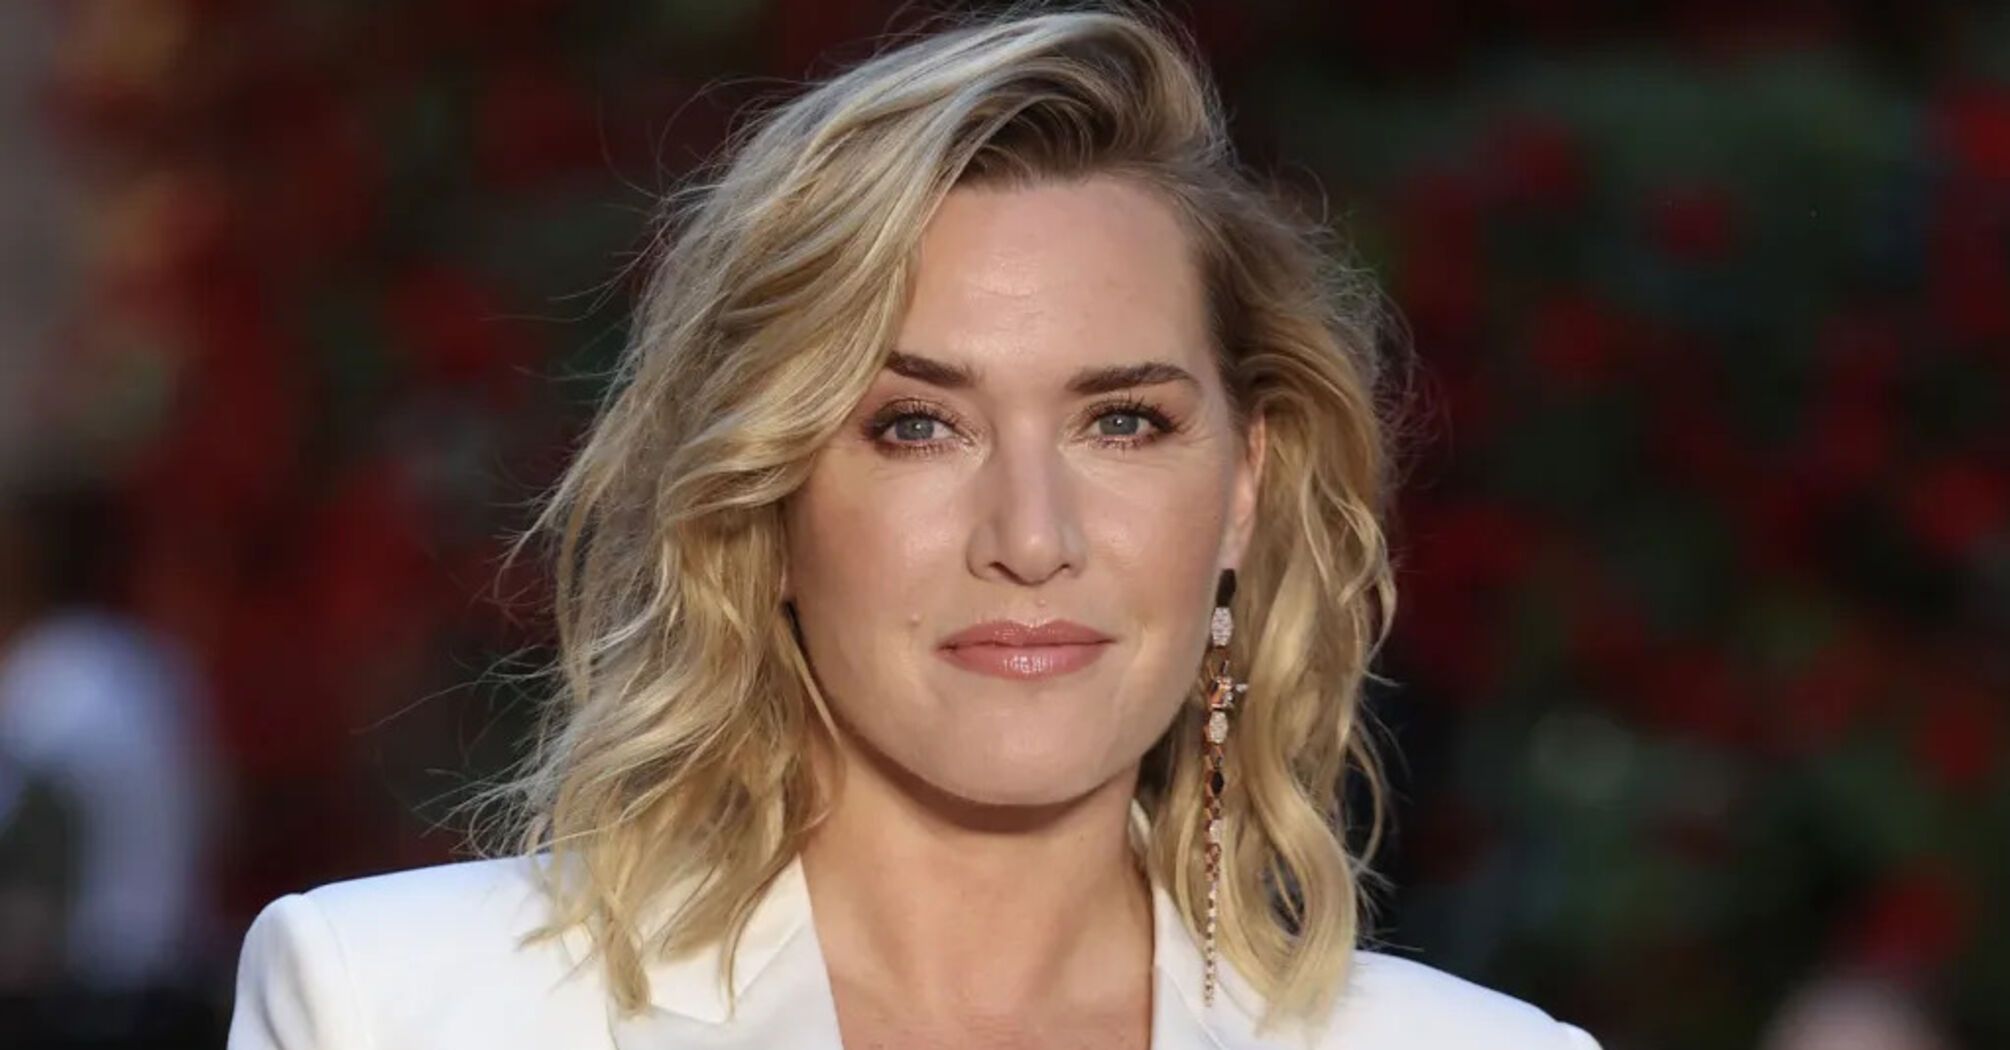 Top 10 facts about actress Kate Winslet